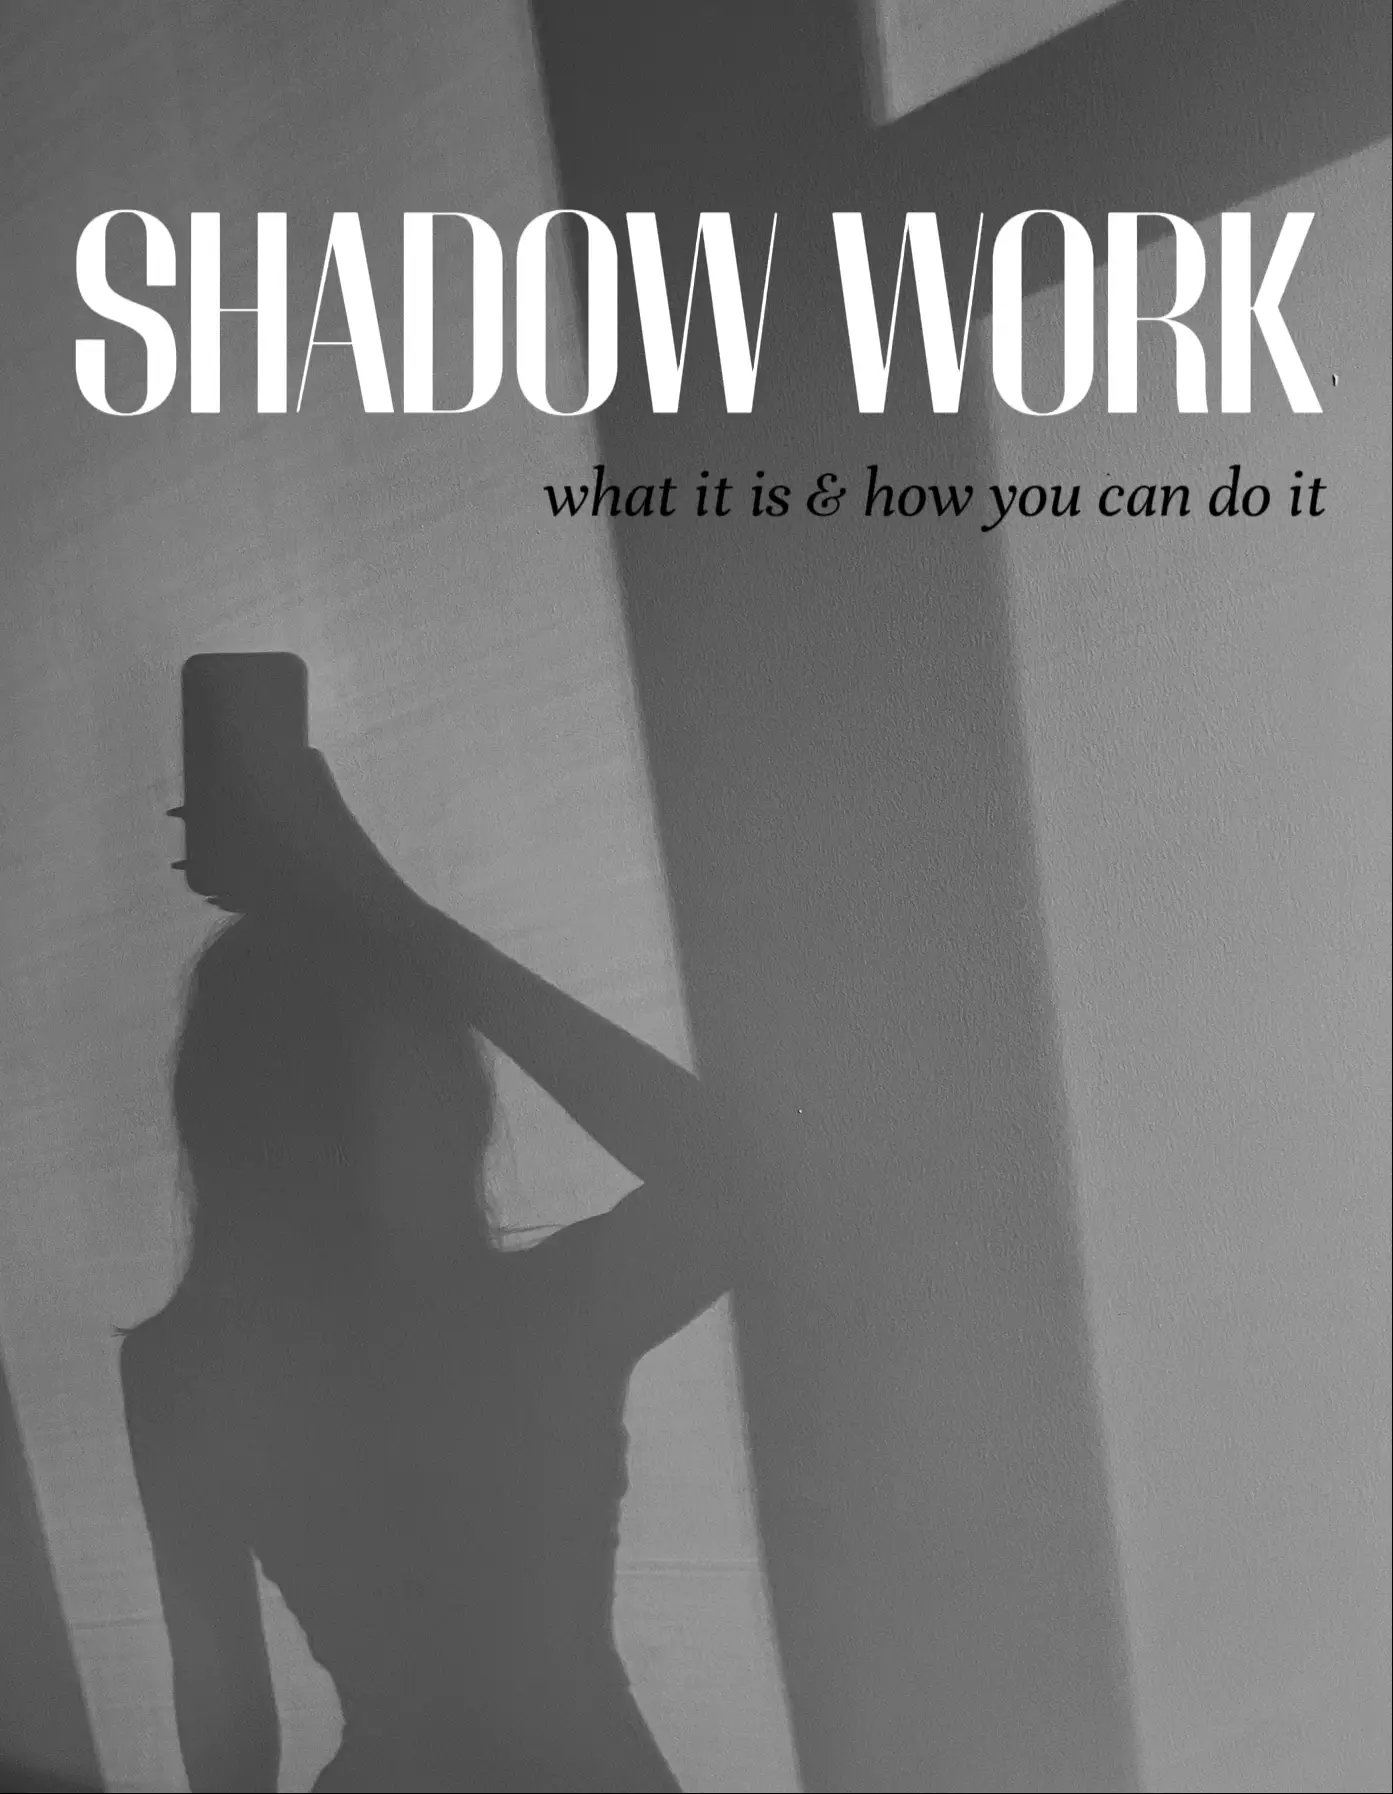 What Is Shadow Work and How Can I Do It?